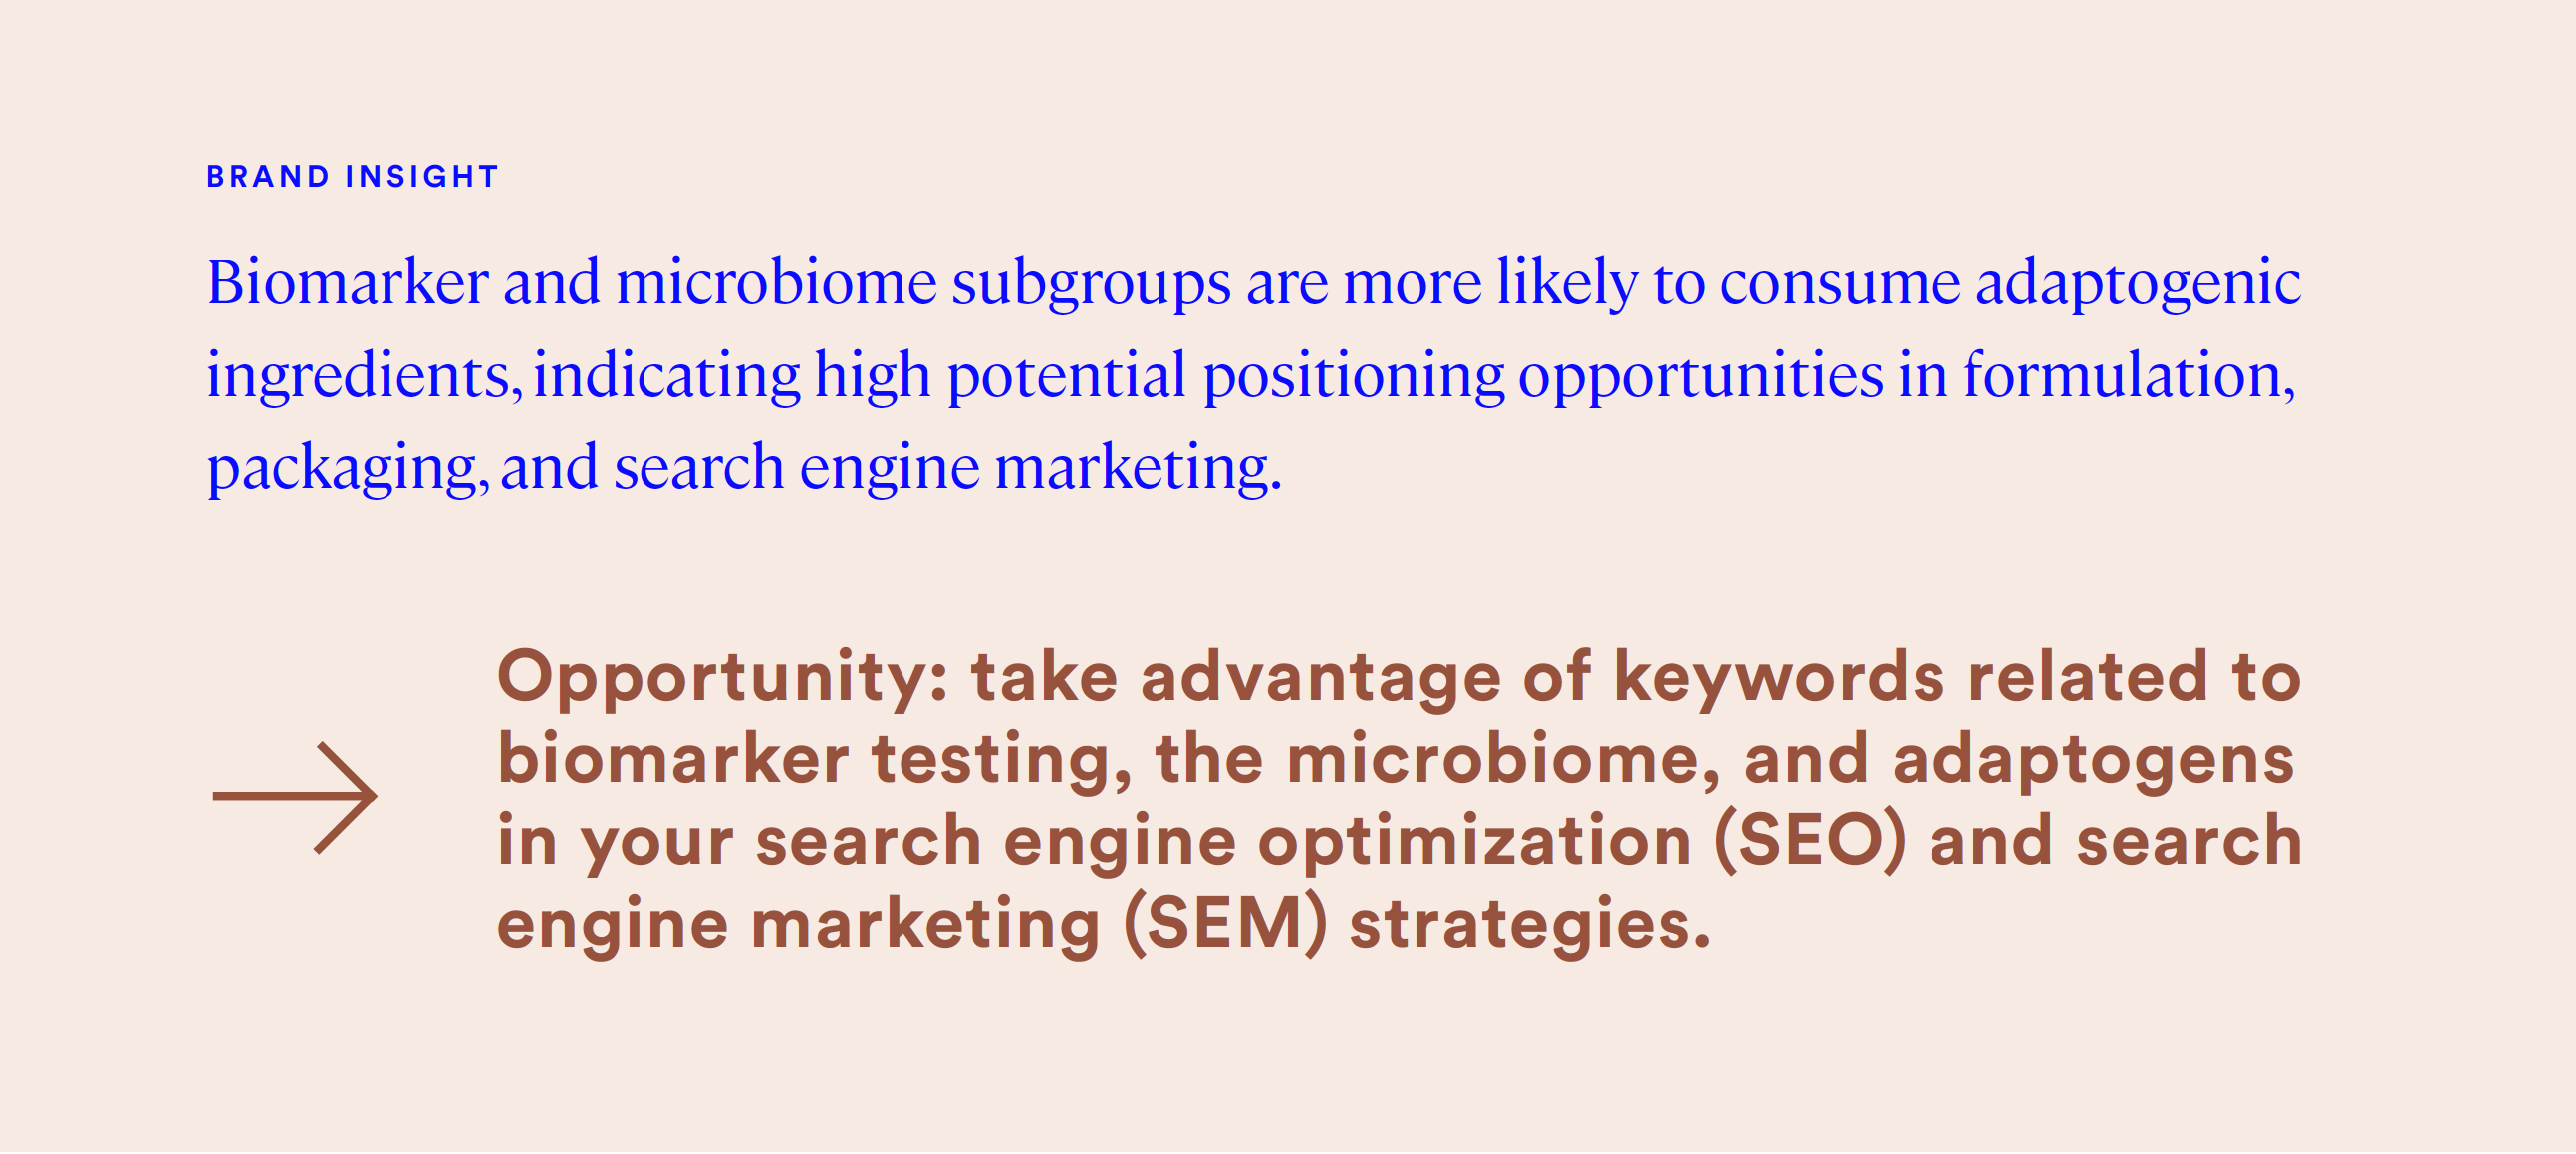 biomarker and microbiome subgroups are more likely to consume adaptogenic ingredients, indicating high potential positioning opportunities in formulation, packaging, and search engine marketing.